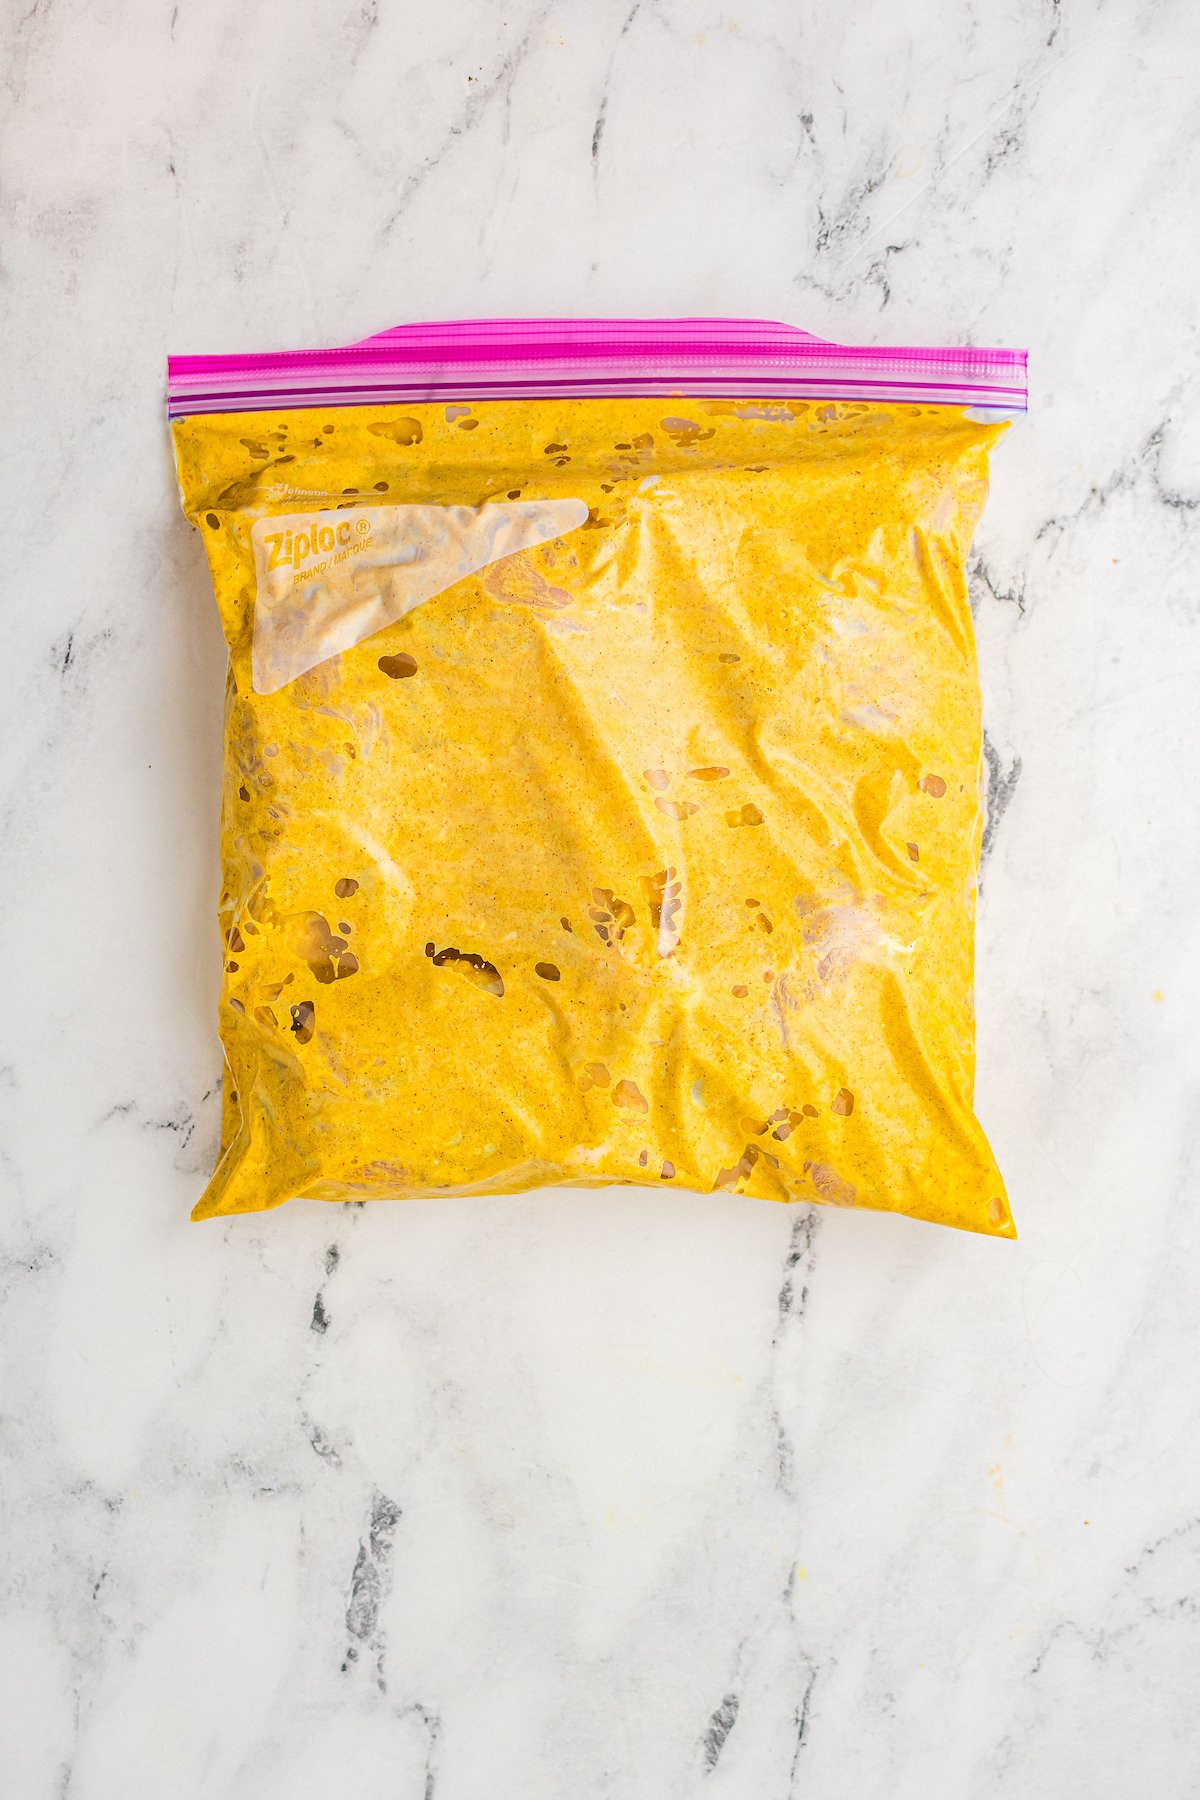 A ziploc bag full of yellow-gold creamy marinade and chicken.